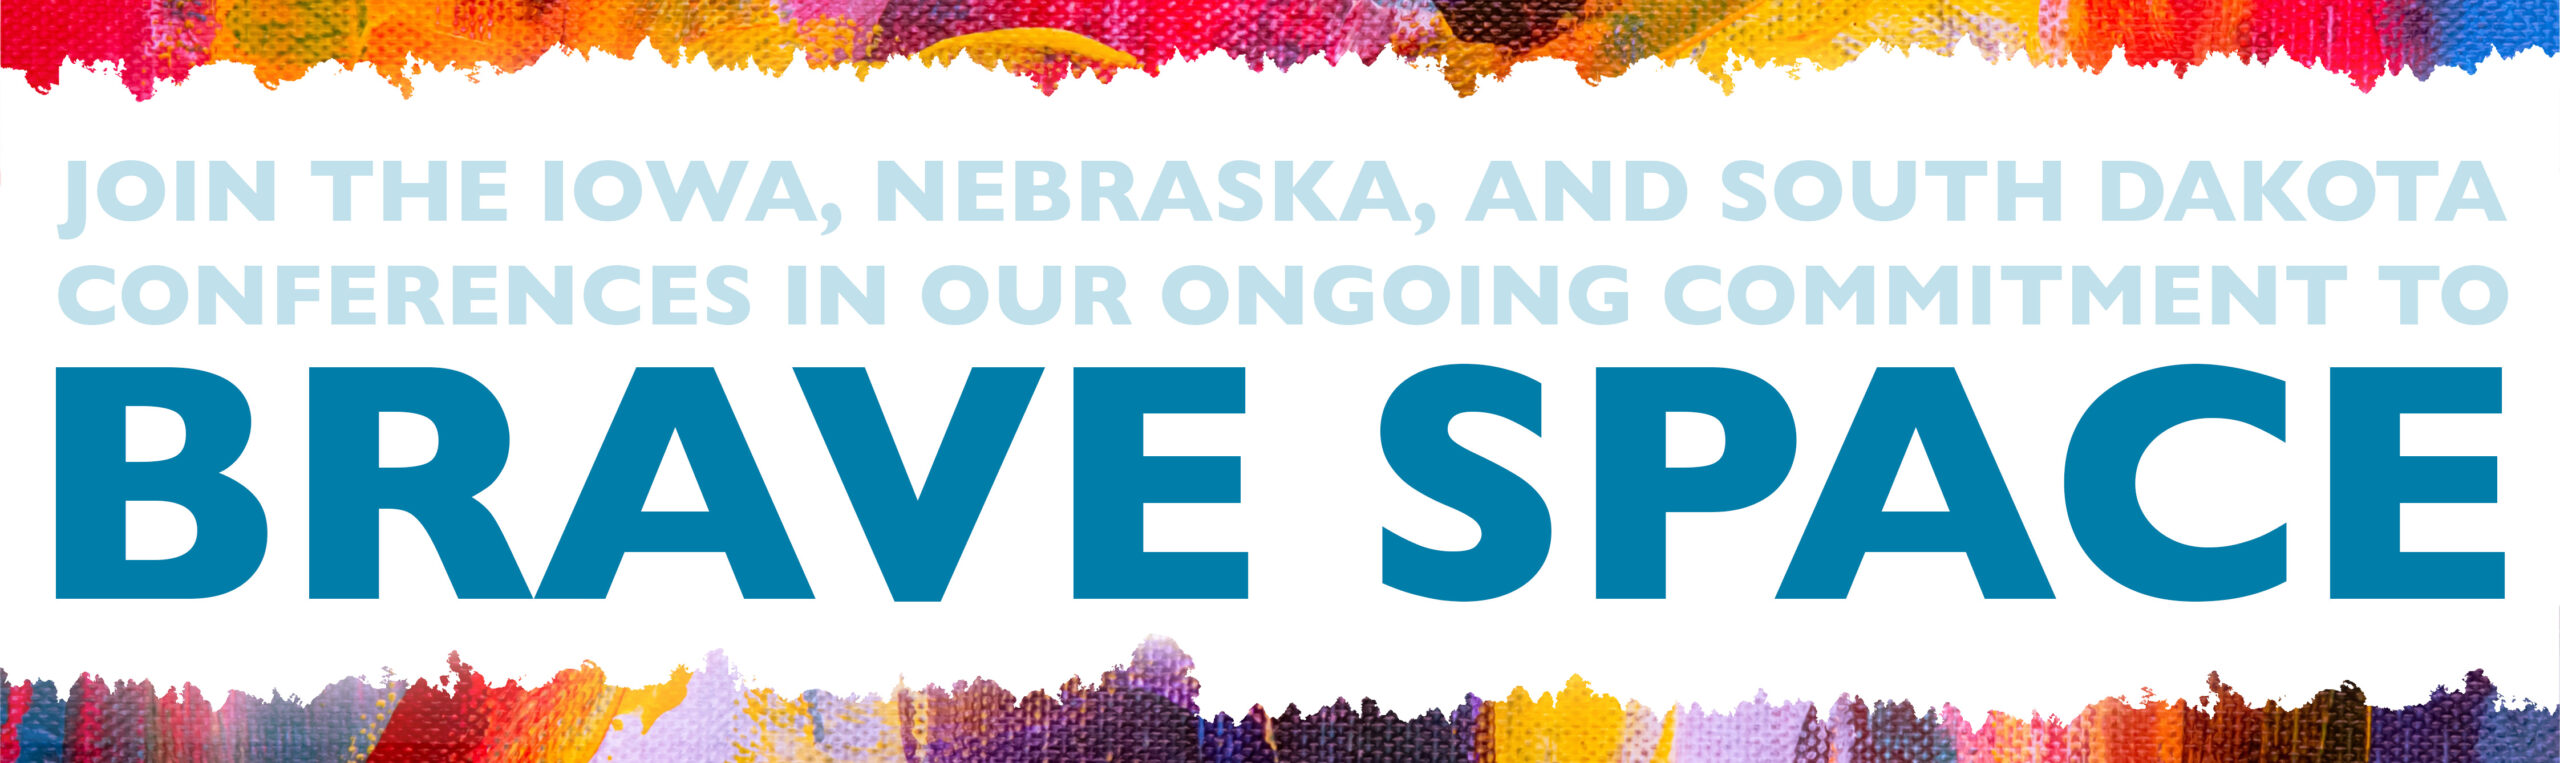 Join the Iowa, Nebraska, and South Dakota Conferences in our Ongoing Commitment to Brave Space